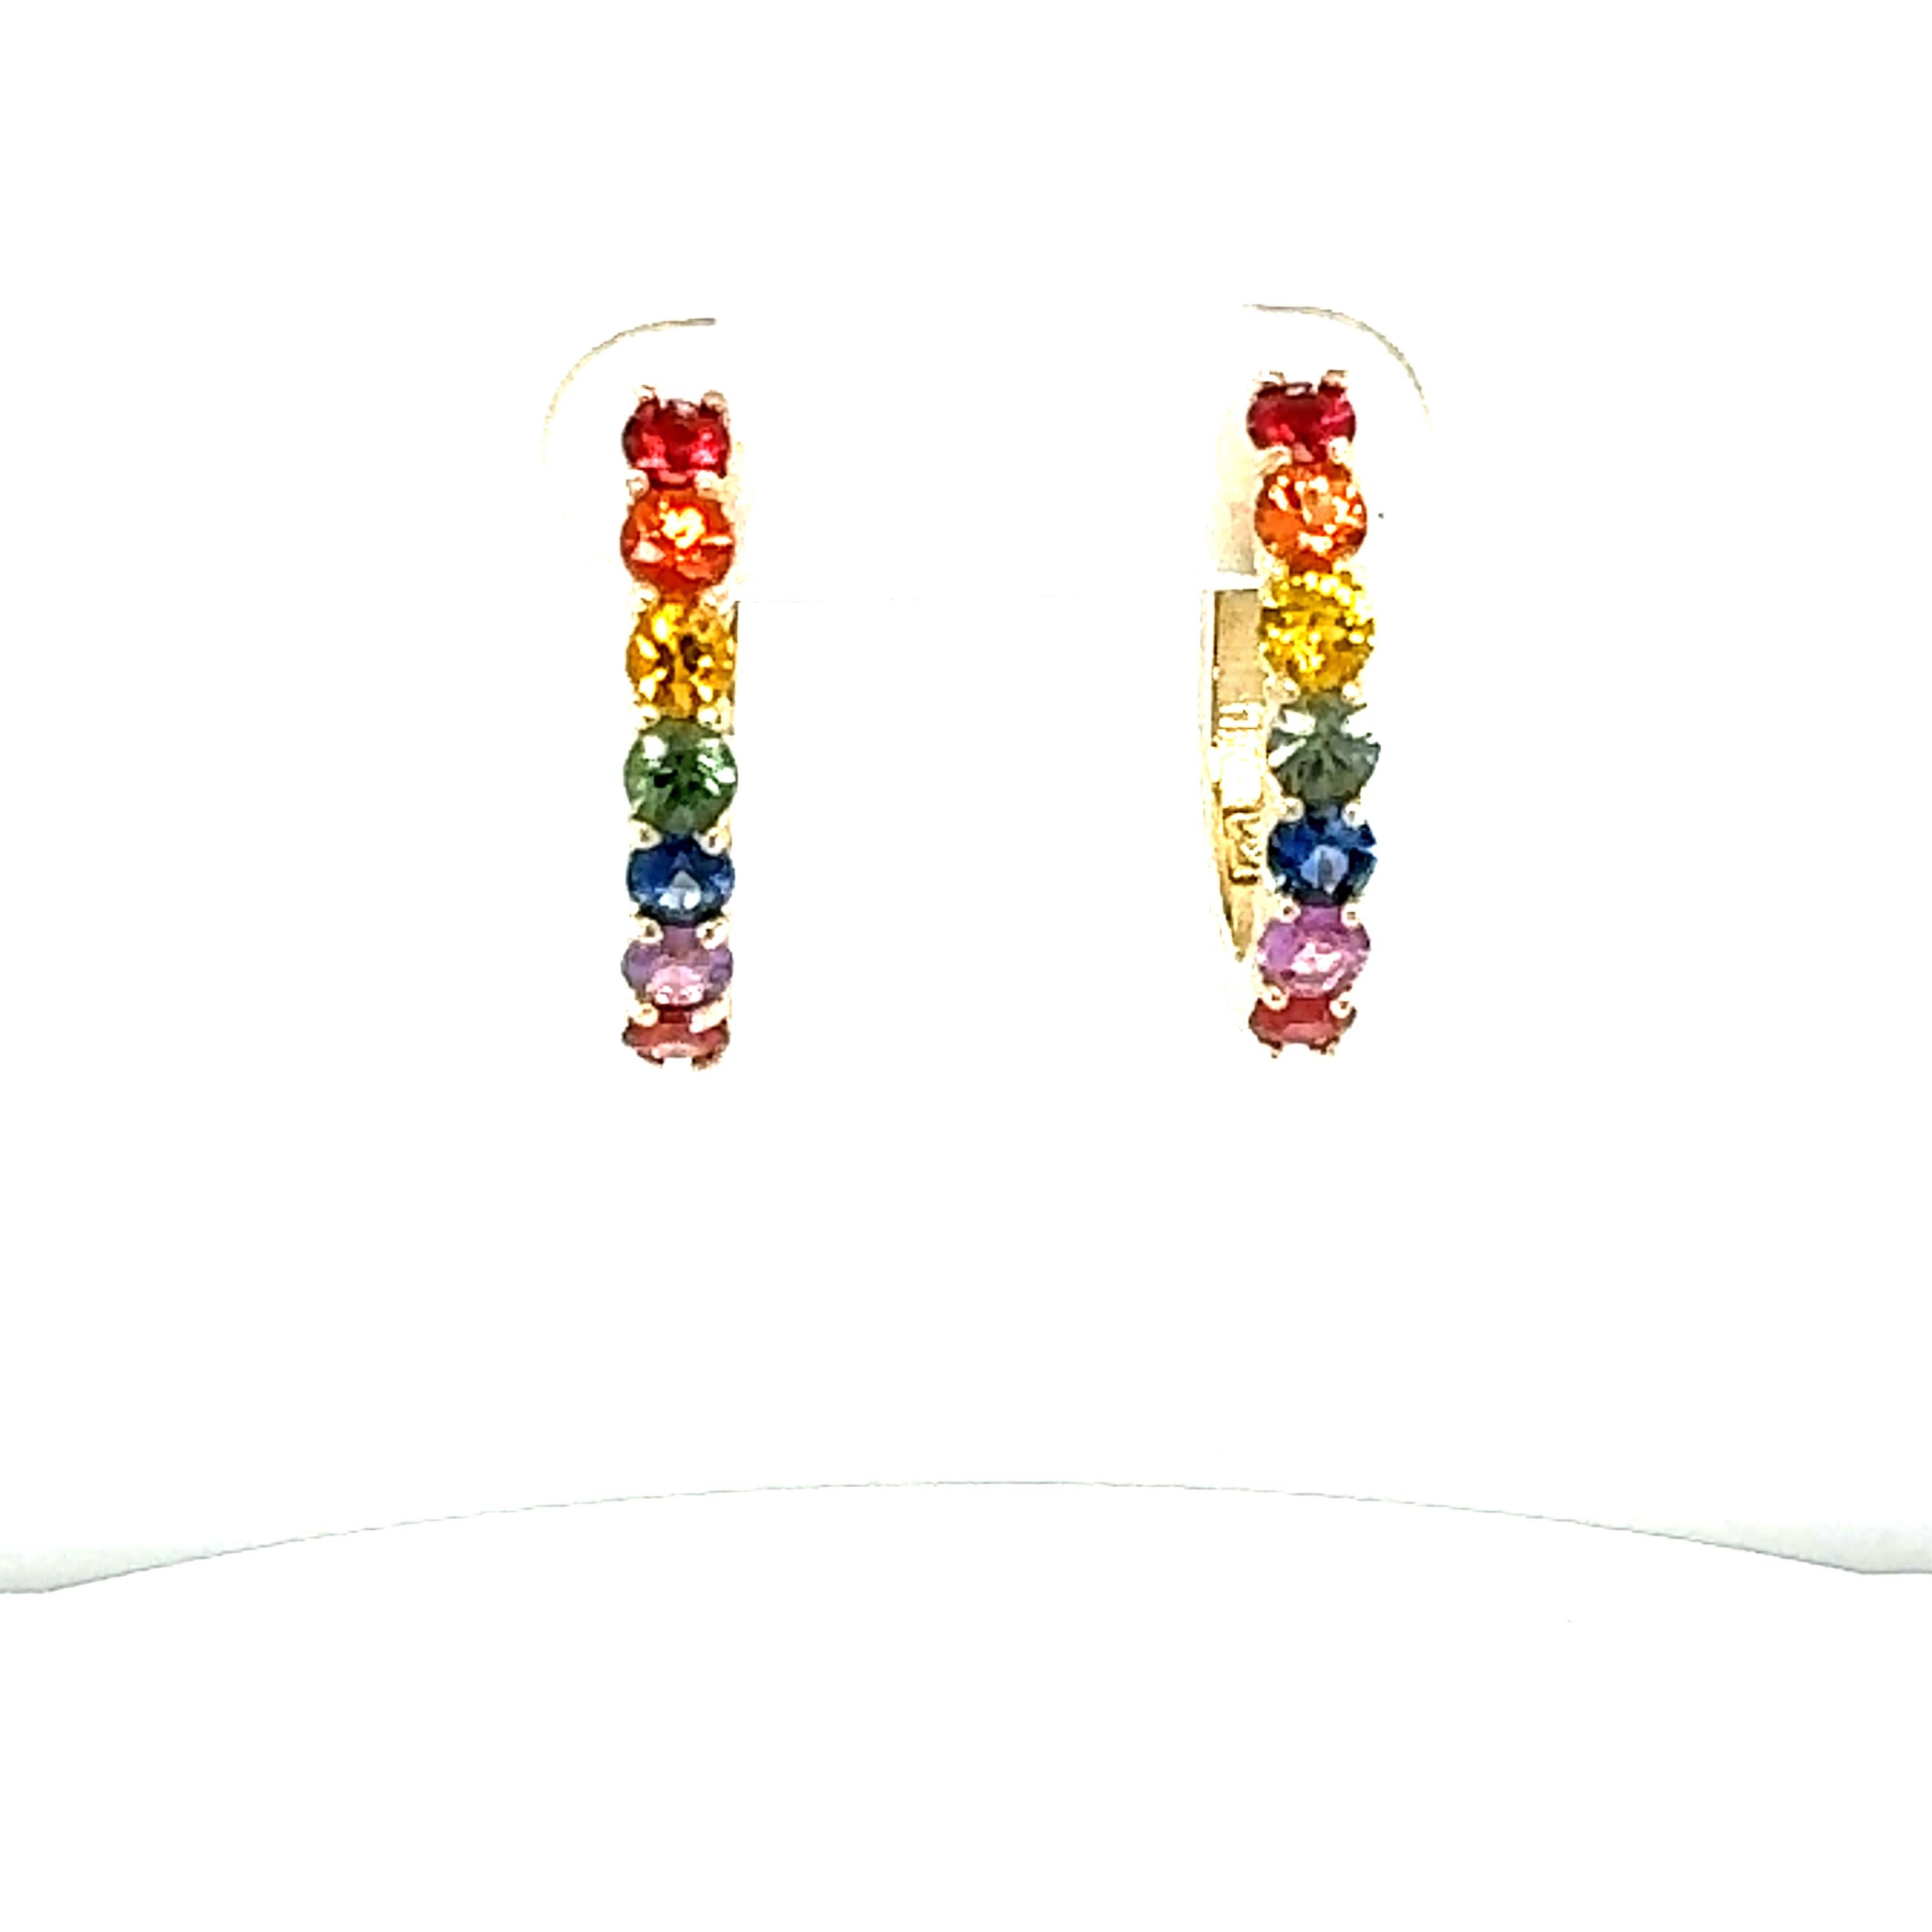 1.88 Carat Rainbow Sapphire Yellow Gold Hoop Earrings
Beautiful Everyday Huggy Earrings 

Item Specs:

14 Round Cut Multi-Colored Natural Sapphires weighing 1.88 carats
Crafted in 14K Yellow Gold approximately 4.3 grams
Length of Earrings is 0.75